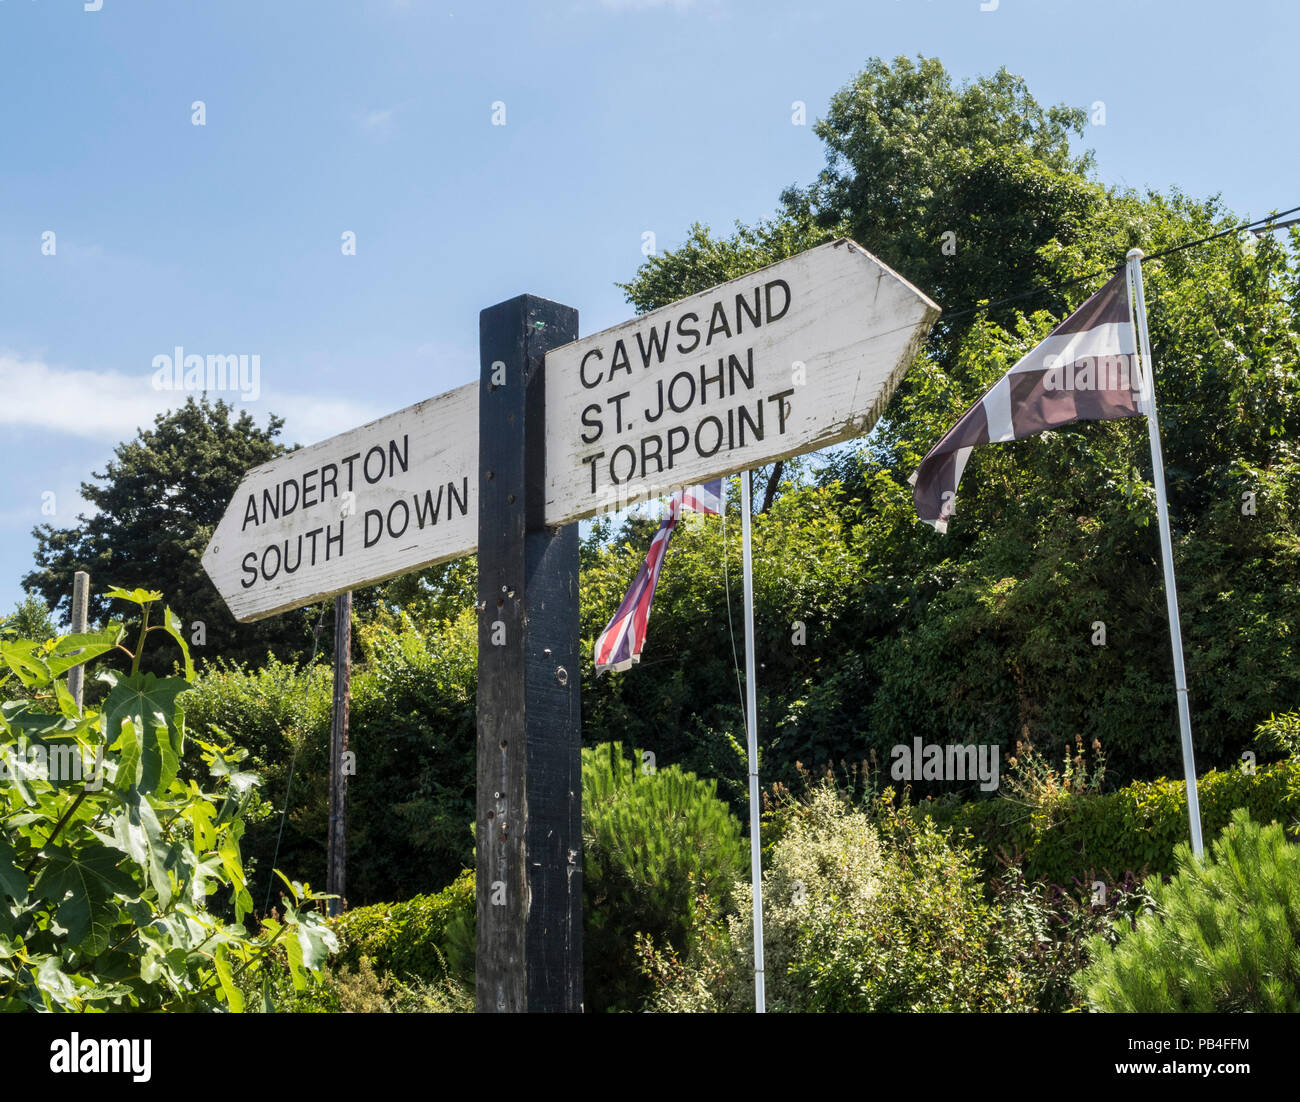 Cornish flag and signpost to Torpoint,Anderton,South Down,Cawsand, and St John at Millbrook, Cornwall Stock Photo